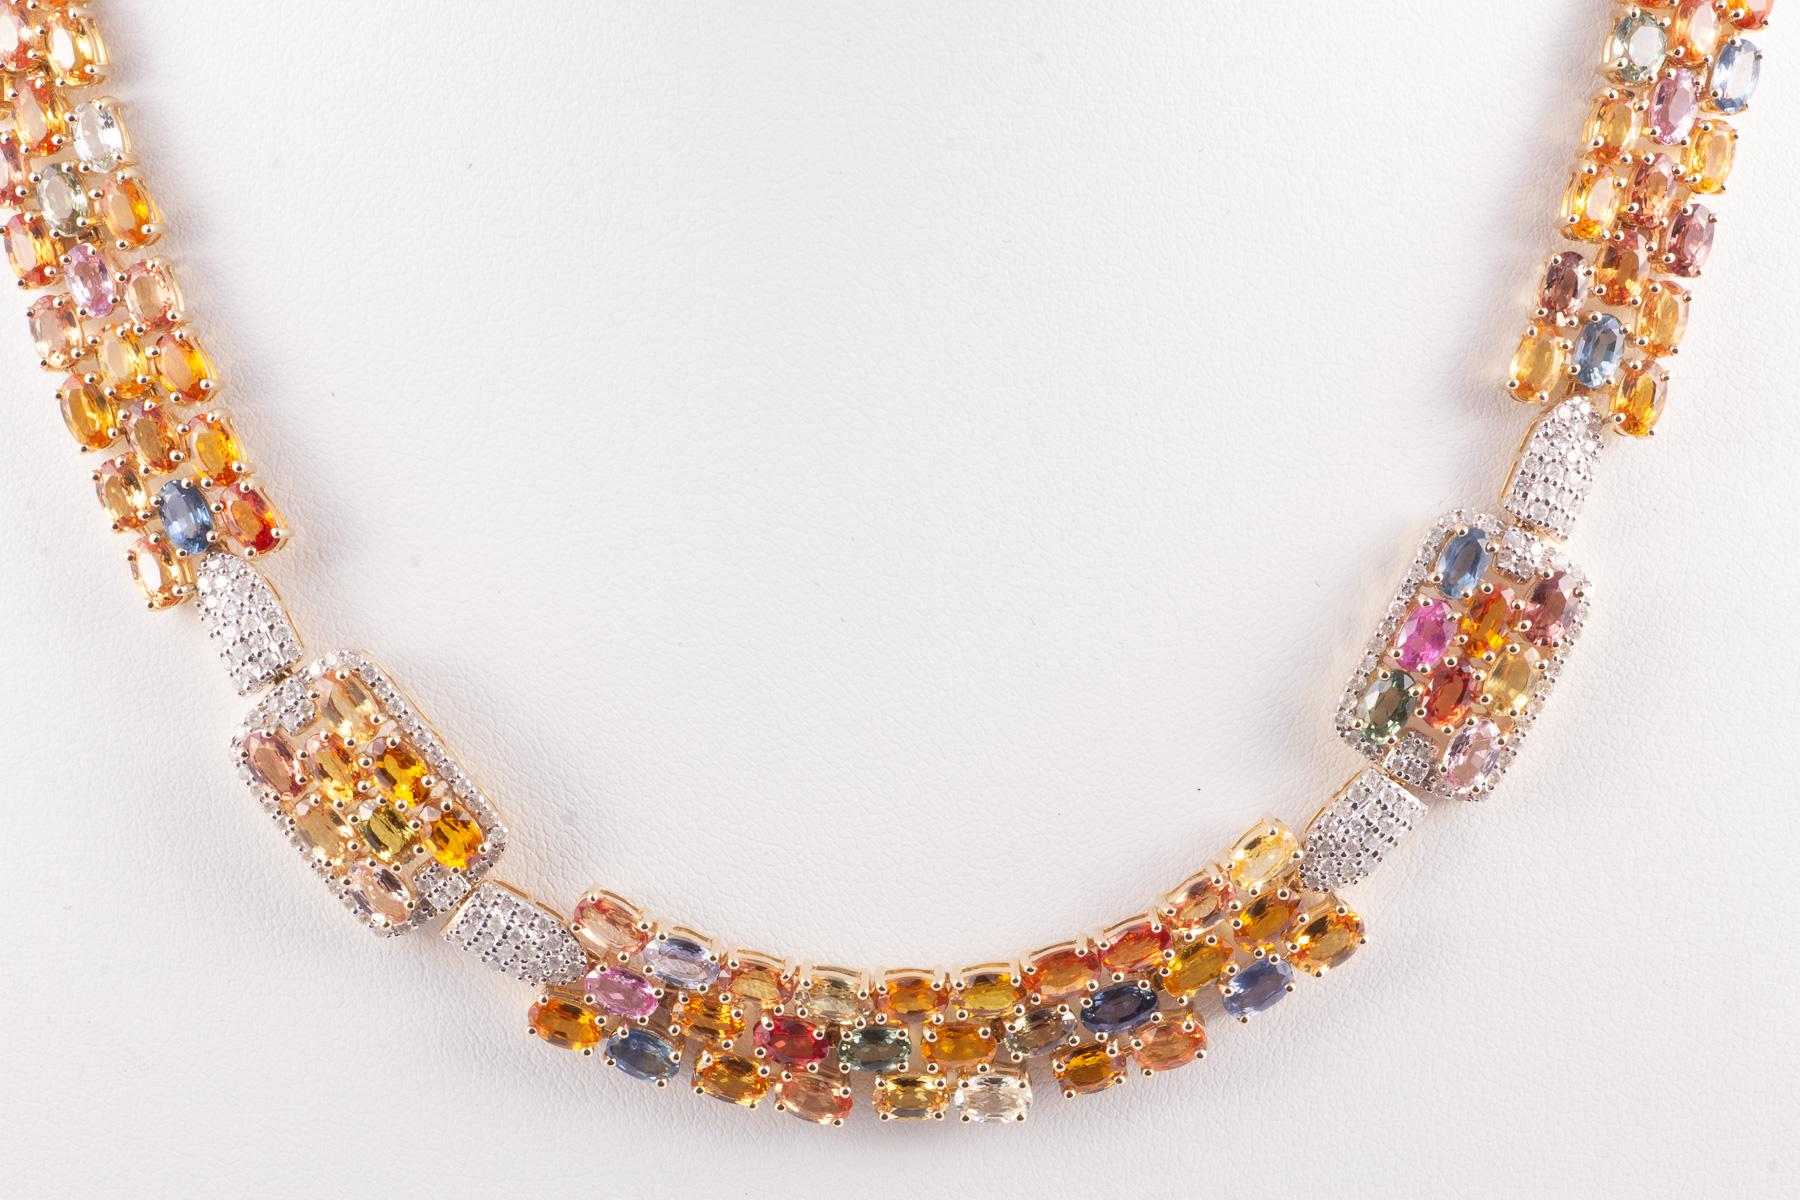 Beautifully colored 14k gold sapphire and diamond necklace having 54.7 carats sapphires and 3.01 carats diamonds